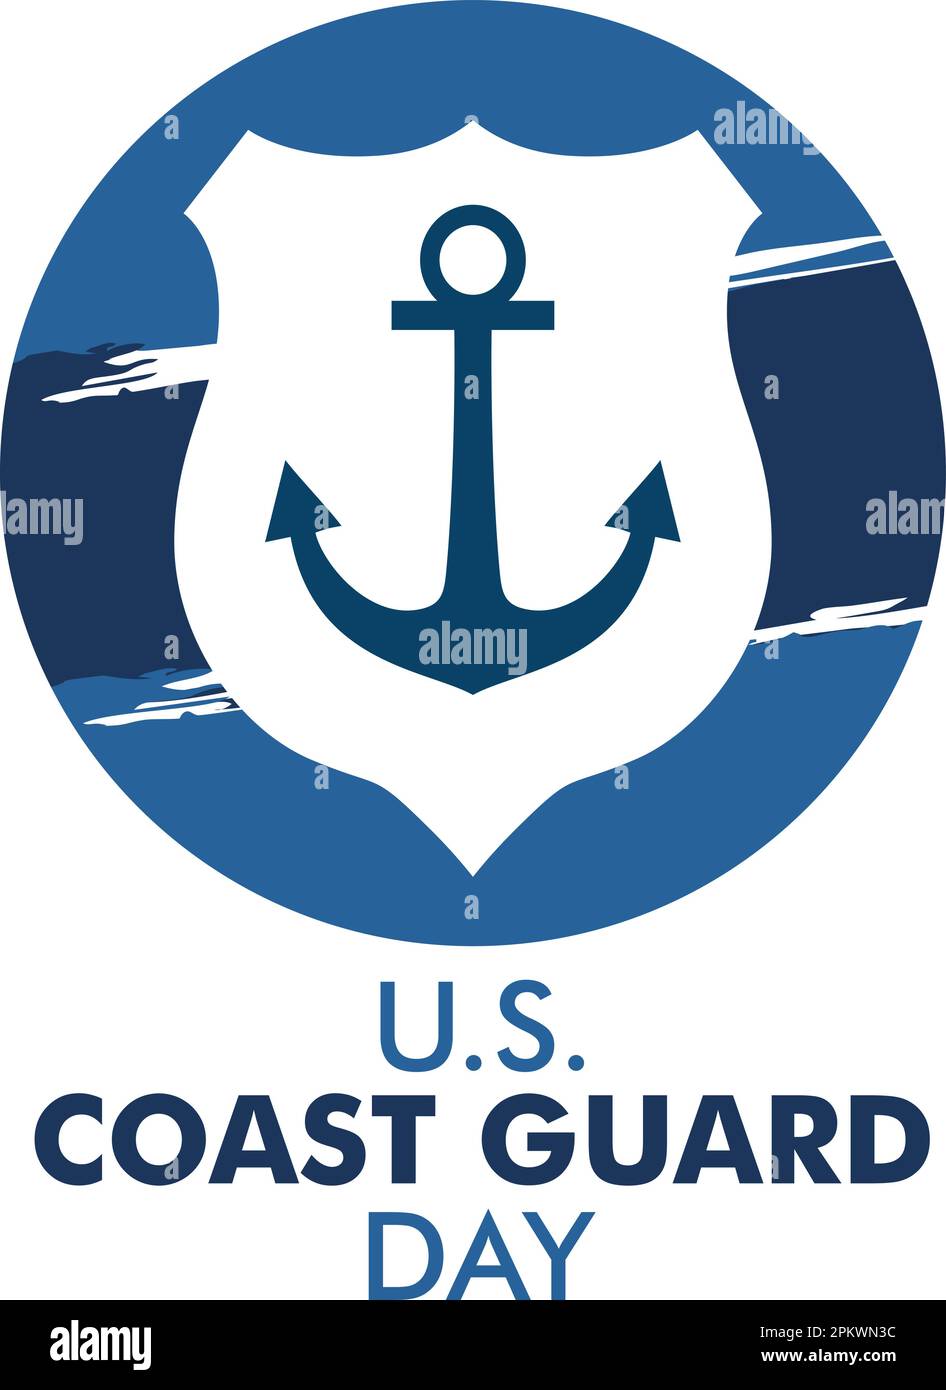 U.S. Coast Guard Day in United States, celebrated annual in August 4. Sea style. Design with anchor and shield. Patriotic element, modern background v Stock Vector